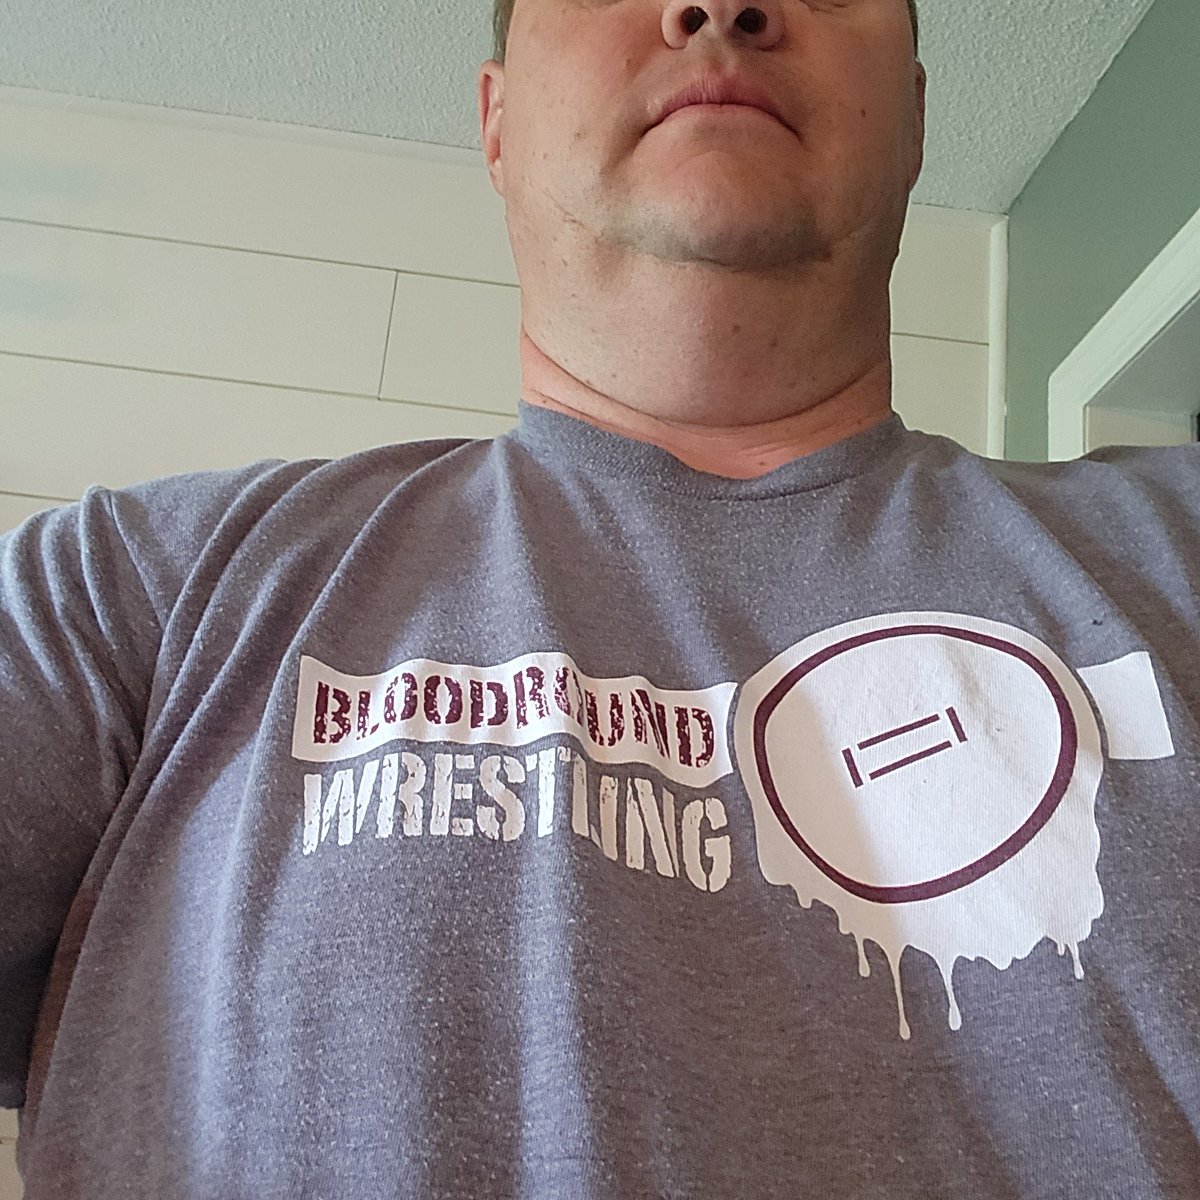 Went with @Bloodround shirt today on this Day 12 of #WrestlingShirtADayinMay it seemed appropriate with this the final day of the Olympic qualifier tournament. As this was the pre-Olympic bloodround.